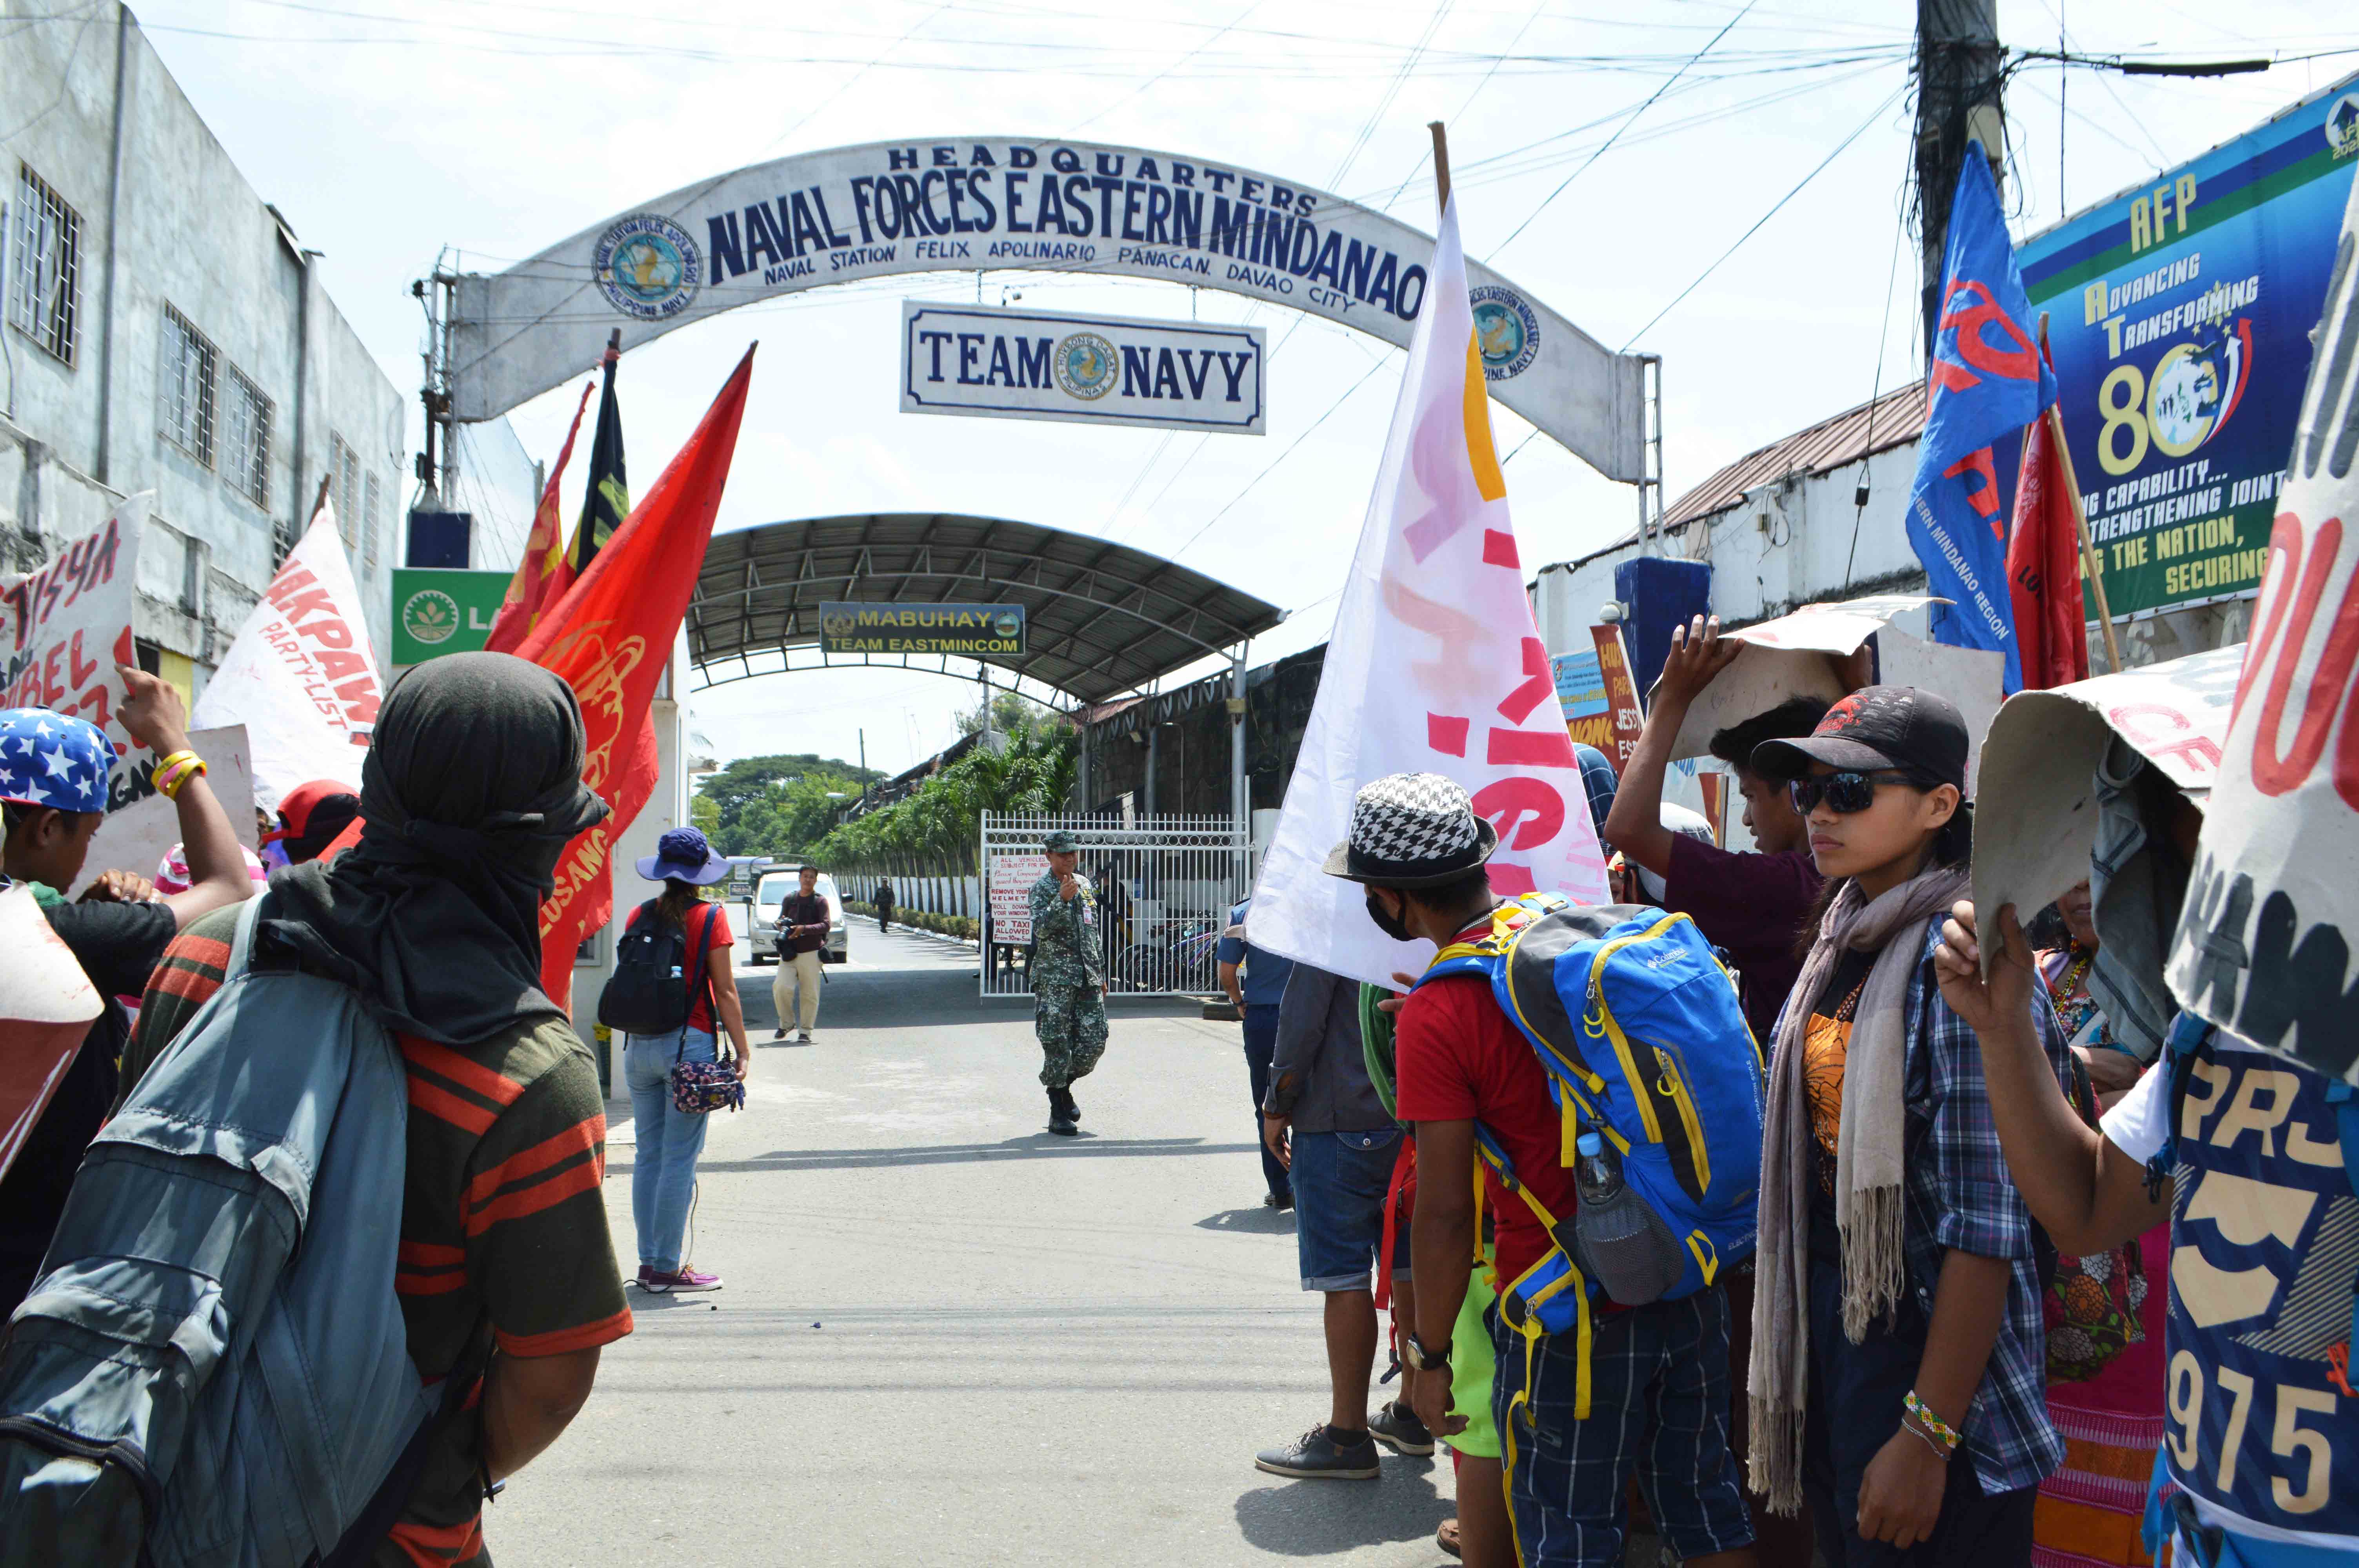 Pasaka Confederation of Lumad organizations in Southern Mindanao stages a protest in front of the military Camp Panacan in Davao City , condemning militarization, human rights violation and military encampment in schools and communities on Friday morning, August 26, 2016. (Medel V. Hernani/davaotoday.com)